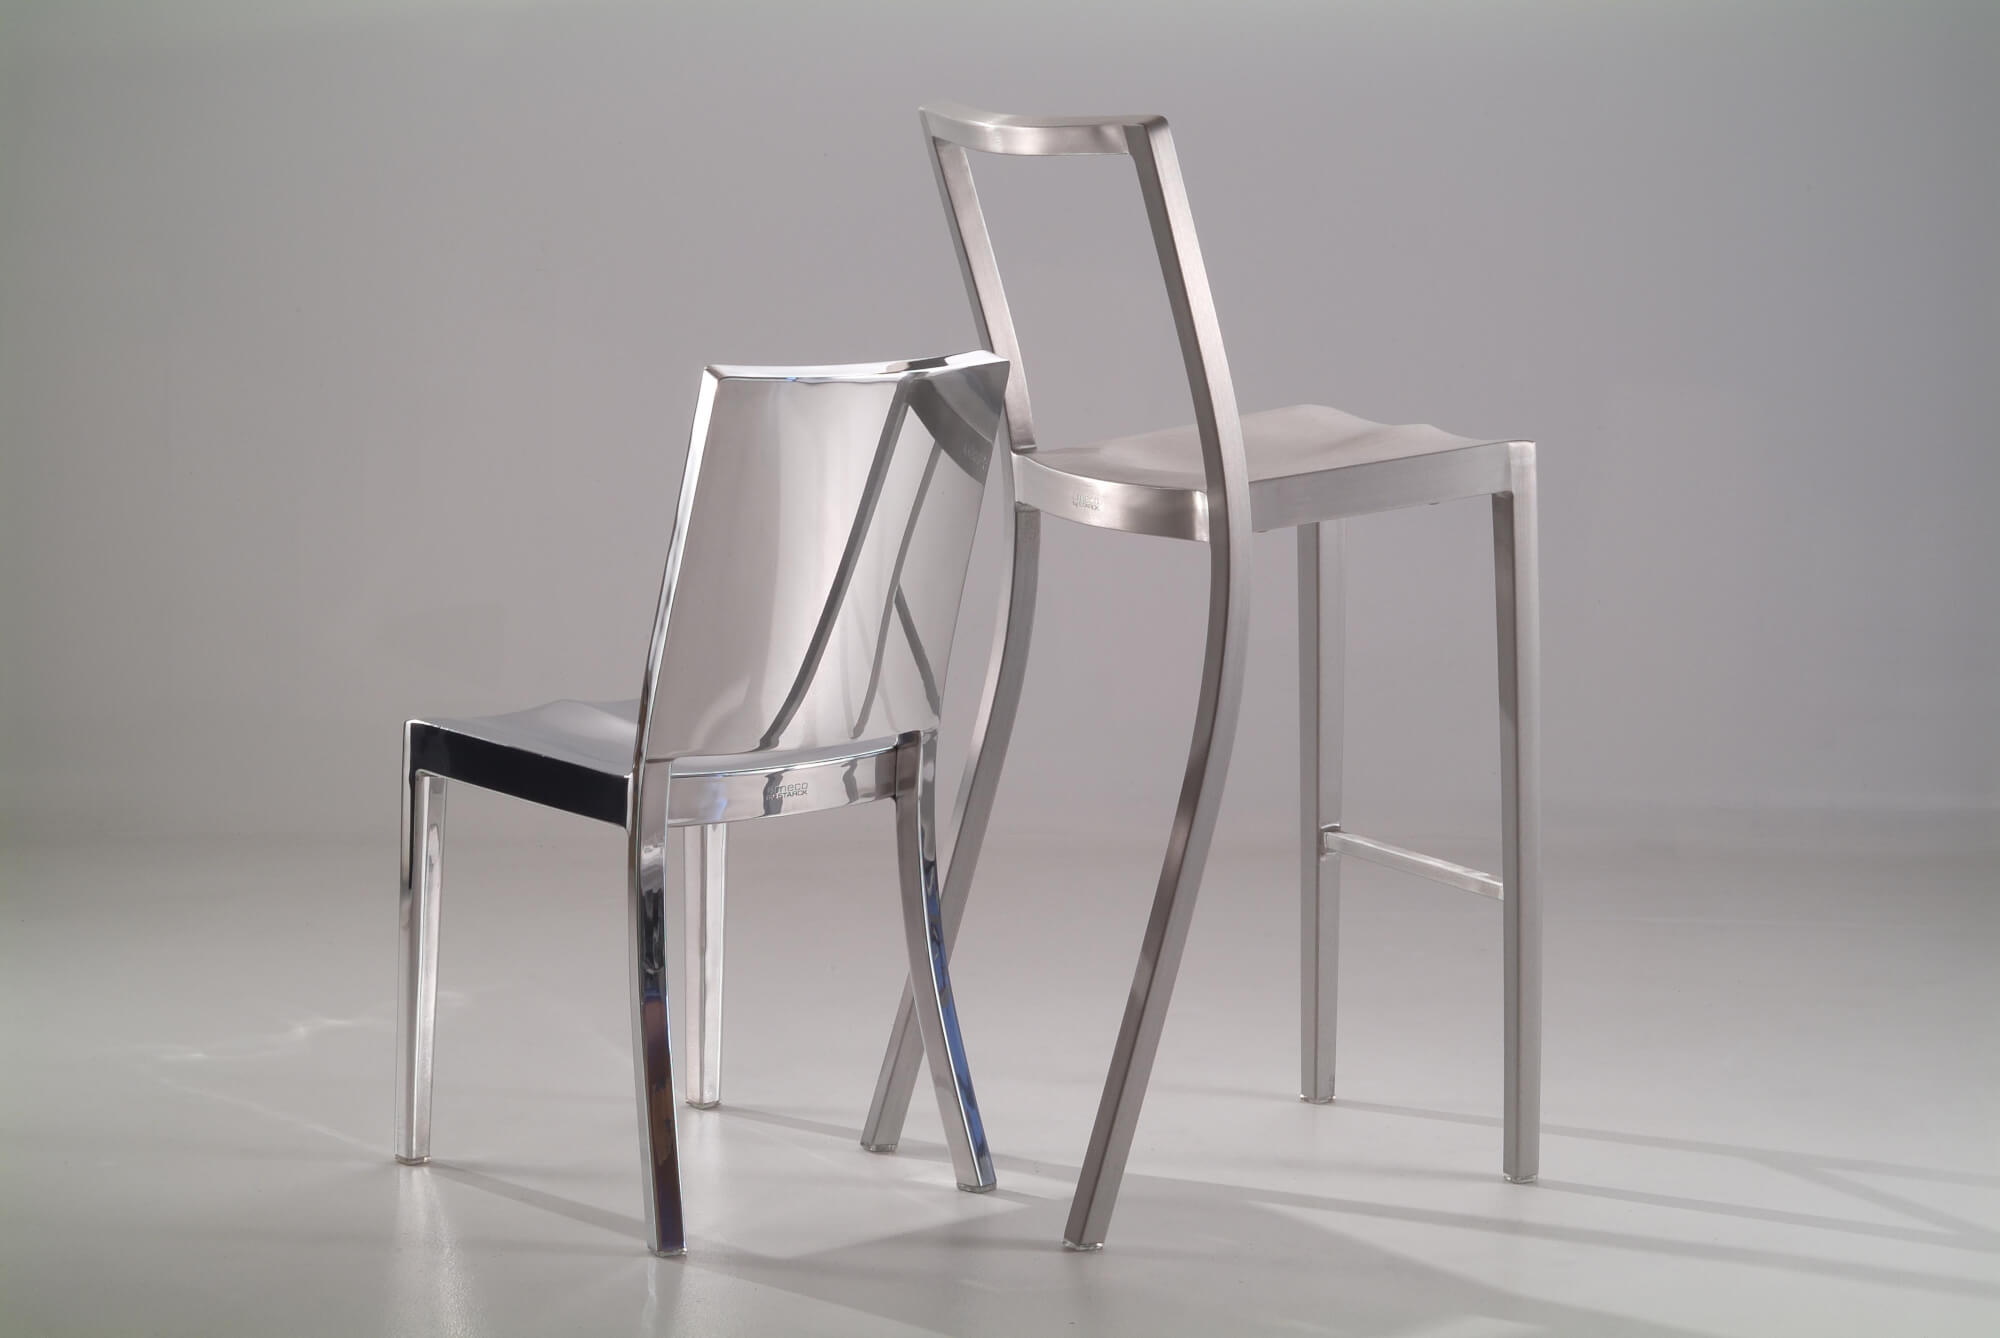 Philippe Starck and Emeco - A Long Lasting Collaboration